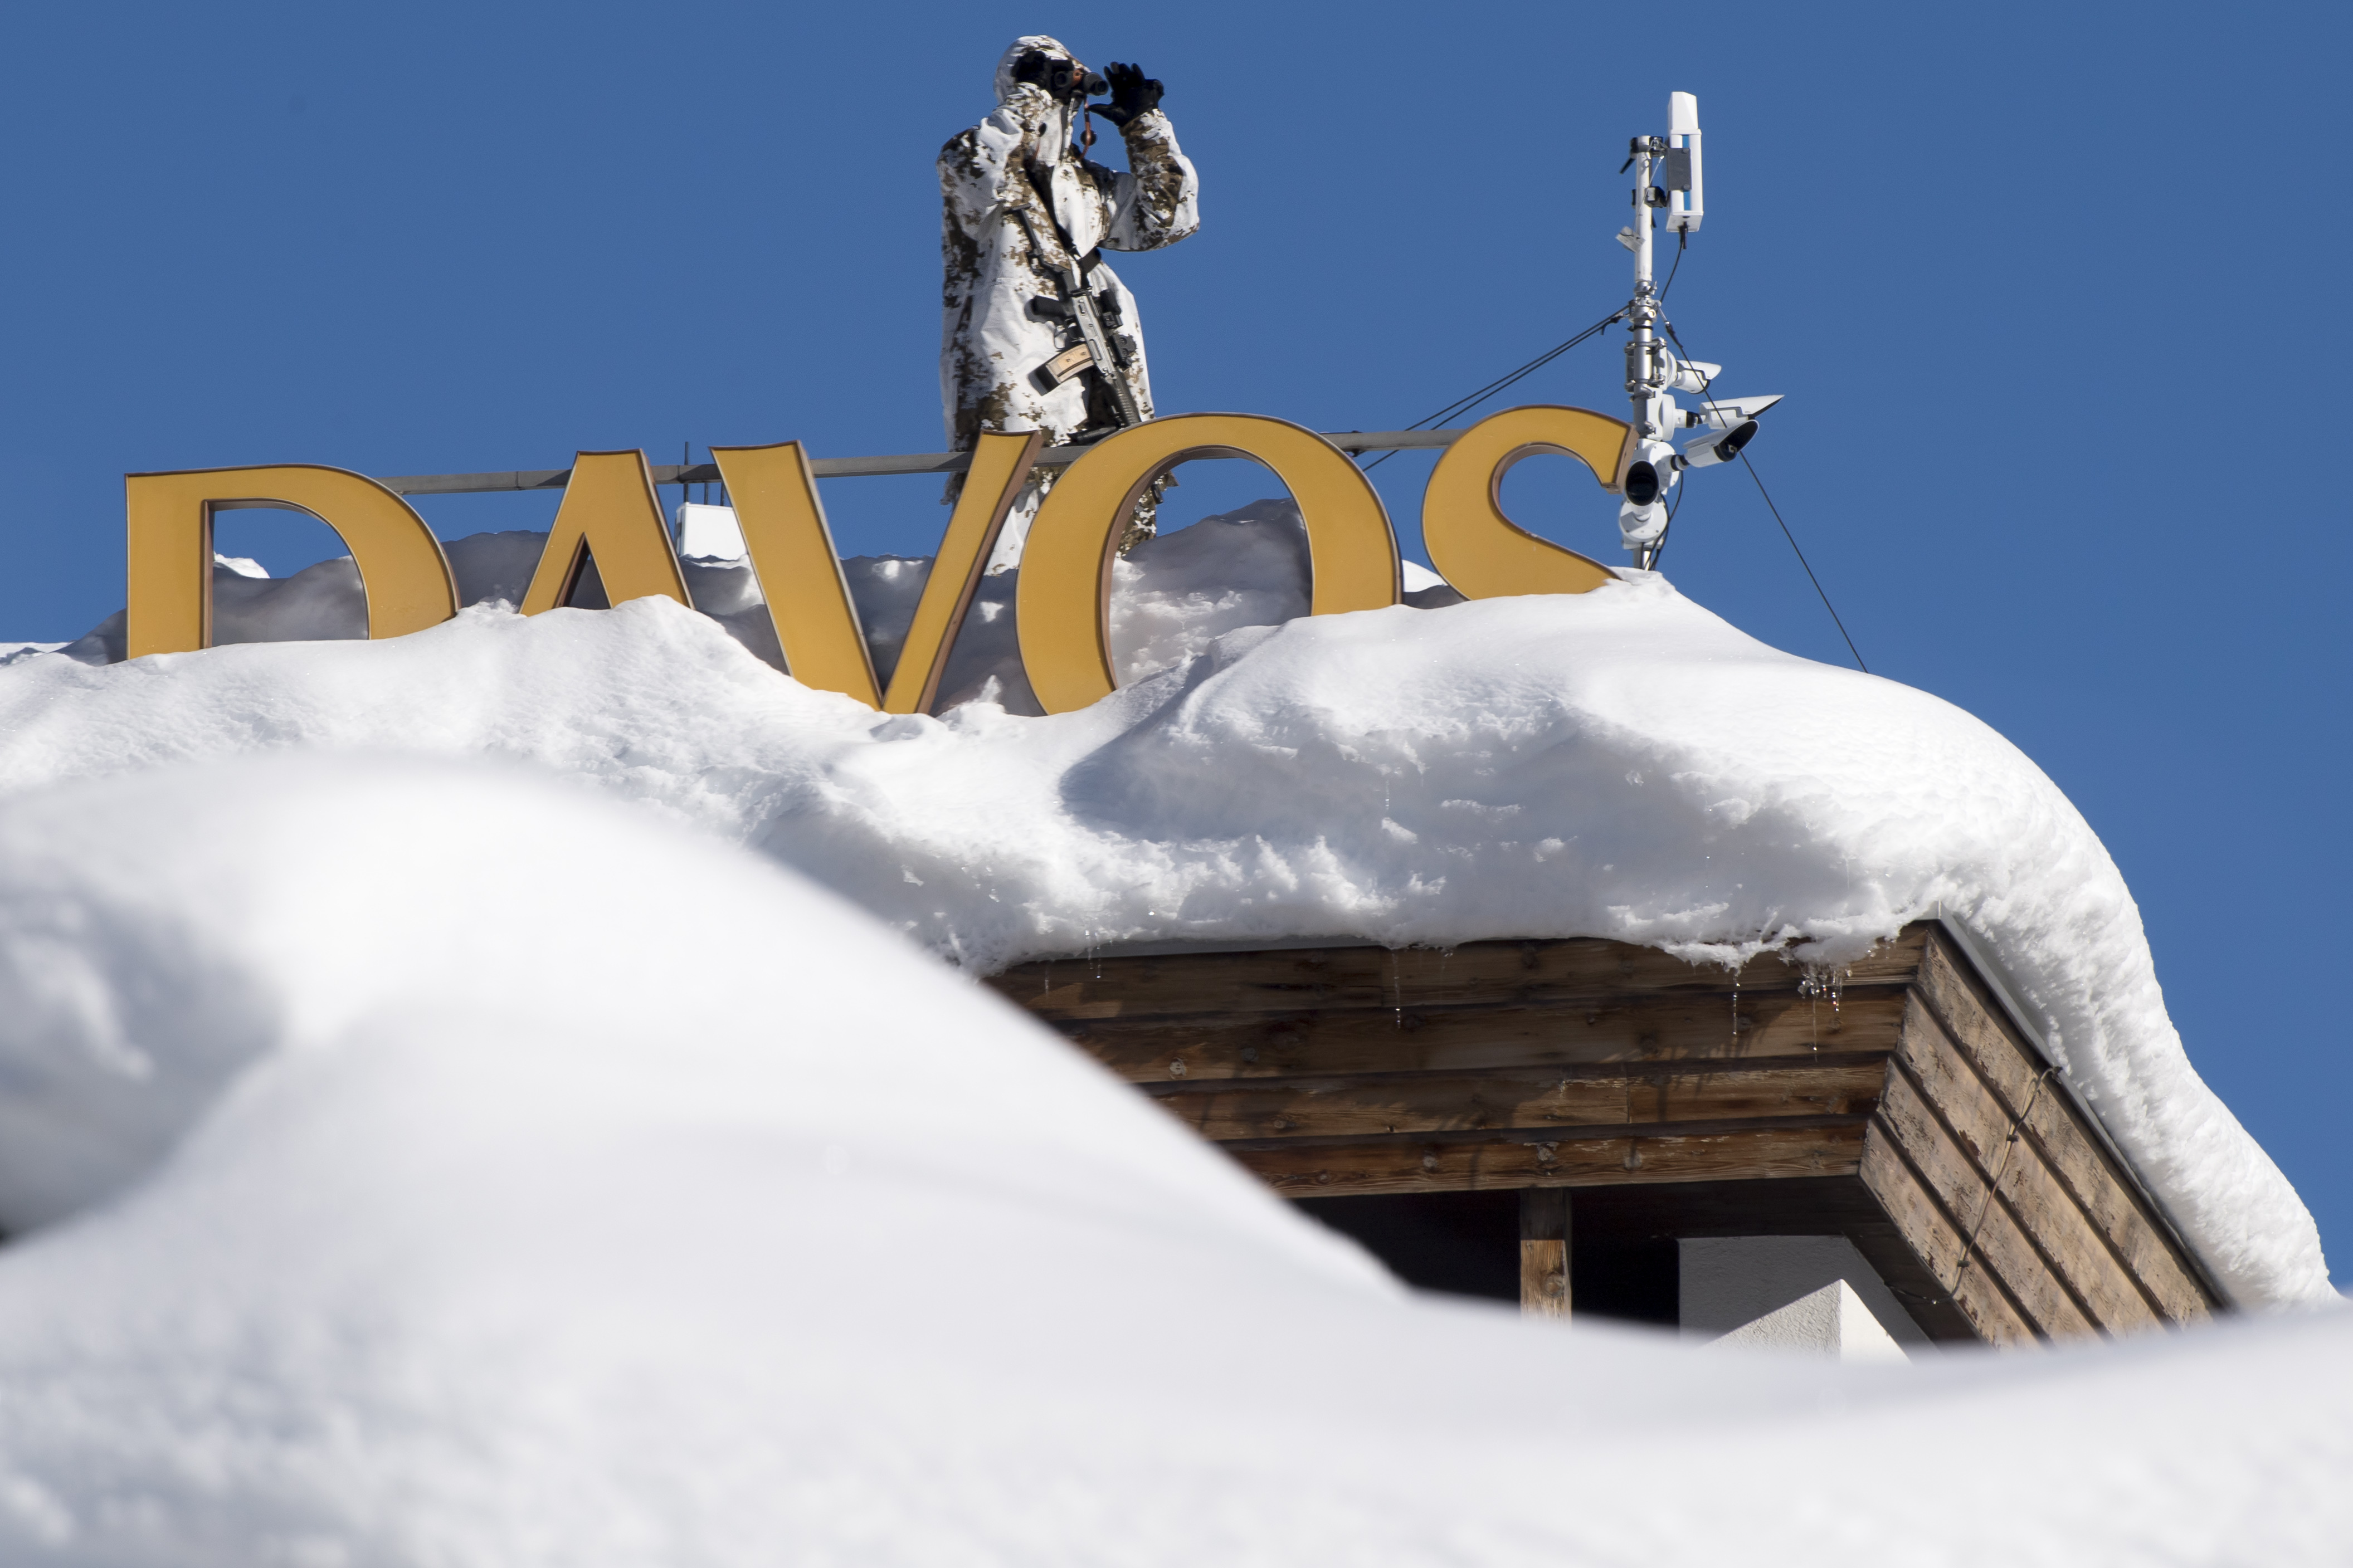 Member of Swiss special police forces stand on the roof of the Kongress Hotel next to the Congress Center the first day of the 49th Annual Meeting of the World Economic Forum, WEF, in Davos, Switzerland, Tuesday, Jan. 22, 2019.  (Laurent Gillieron/Keystone via AP)